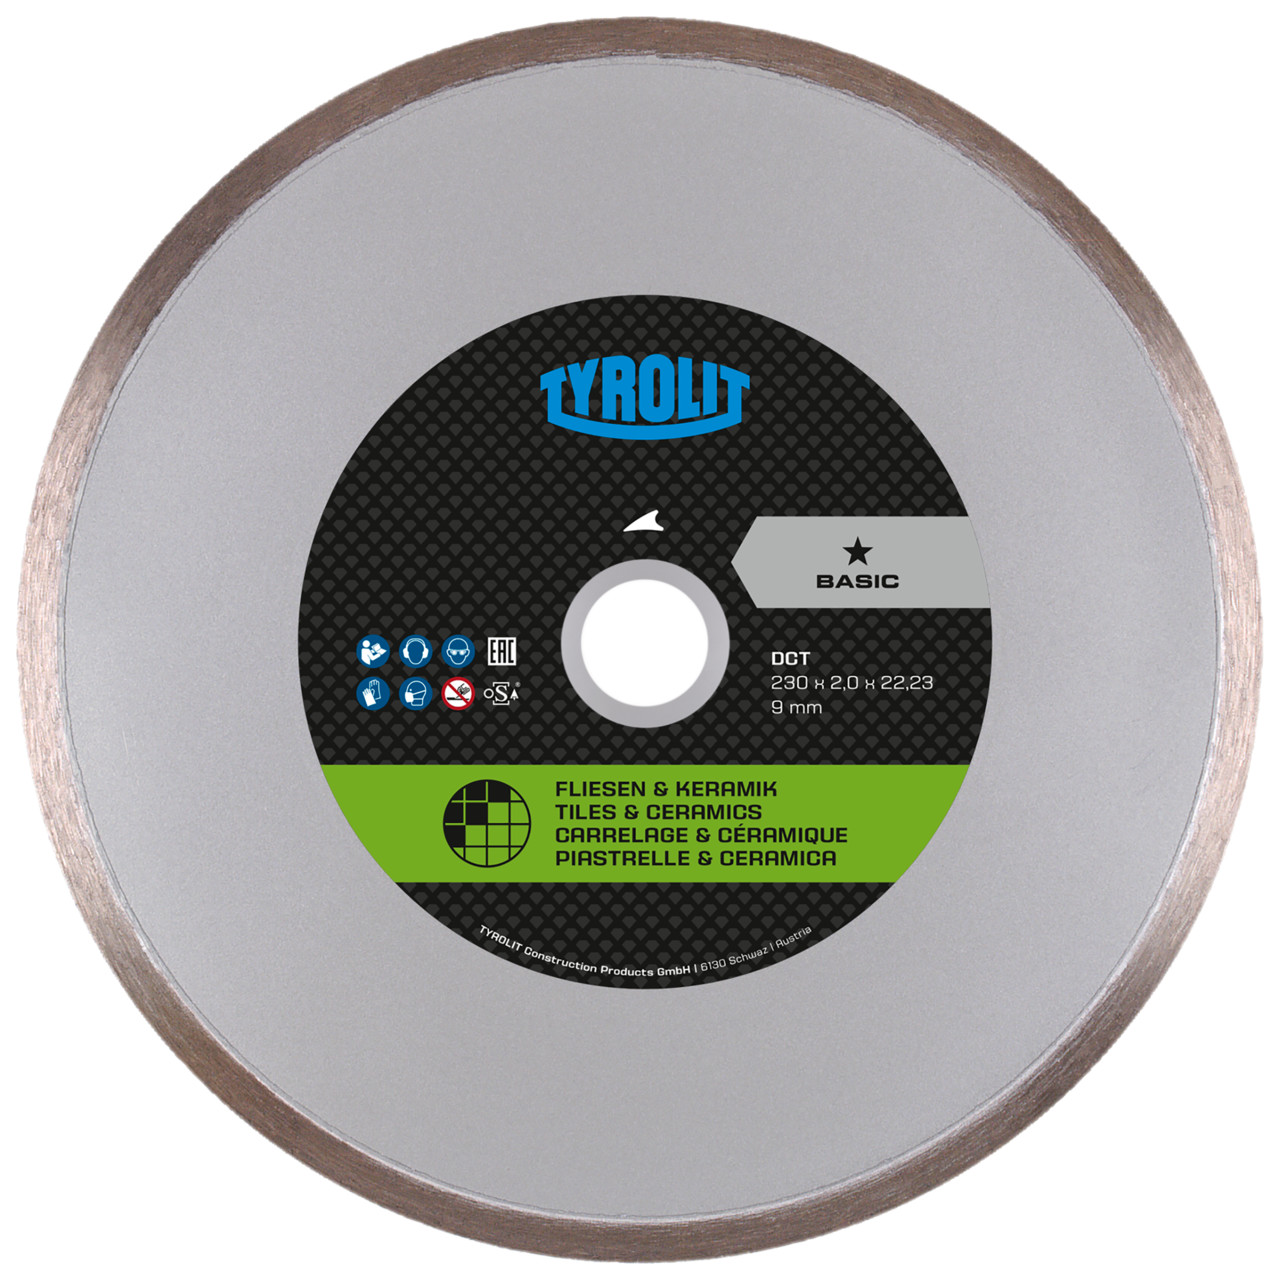 Tyrolit Dry-cutting saw blades DxDxH 180x2x22.23 DCT, shape: 1A1R (cutting disc with continuous cutting wheel), Art. 475983